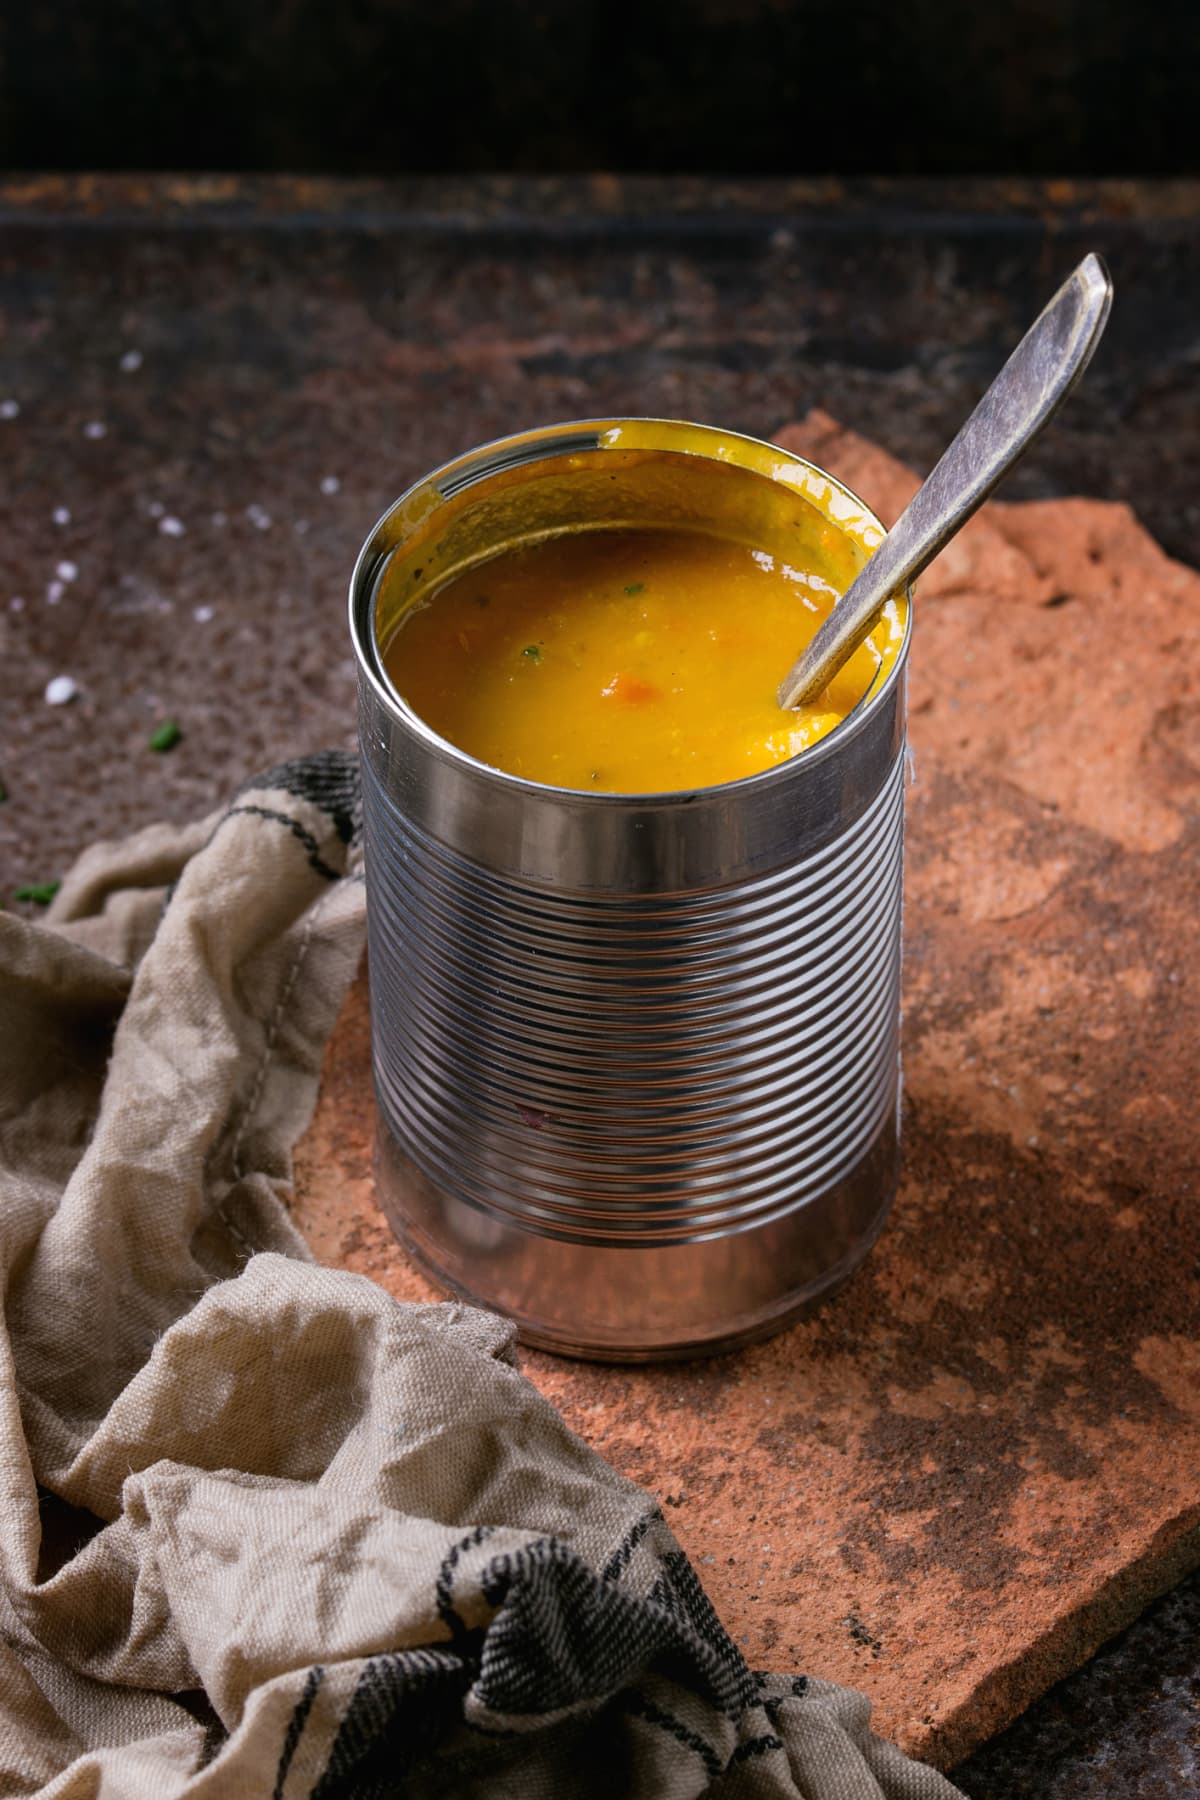 Tin can of carrot soup with spoon, standing on kitchen towel  and clay board over old rusty iron background. Dark rustic style